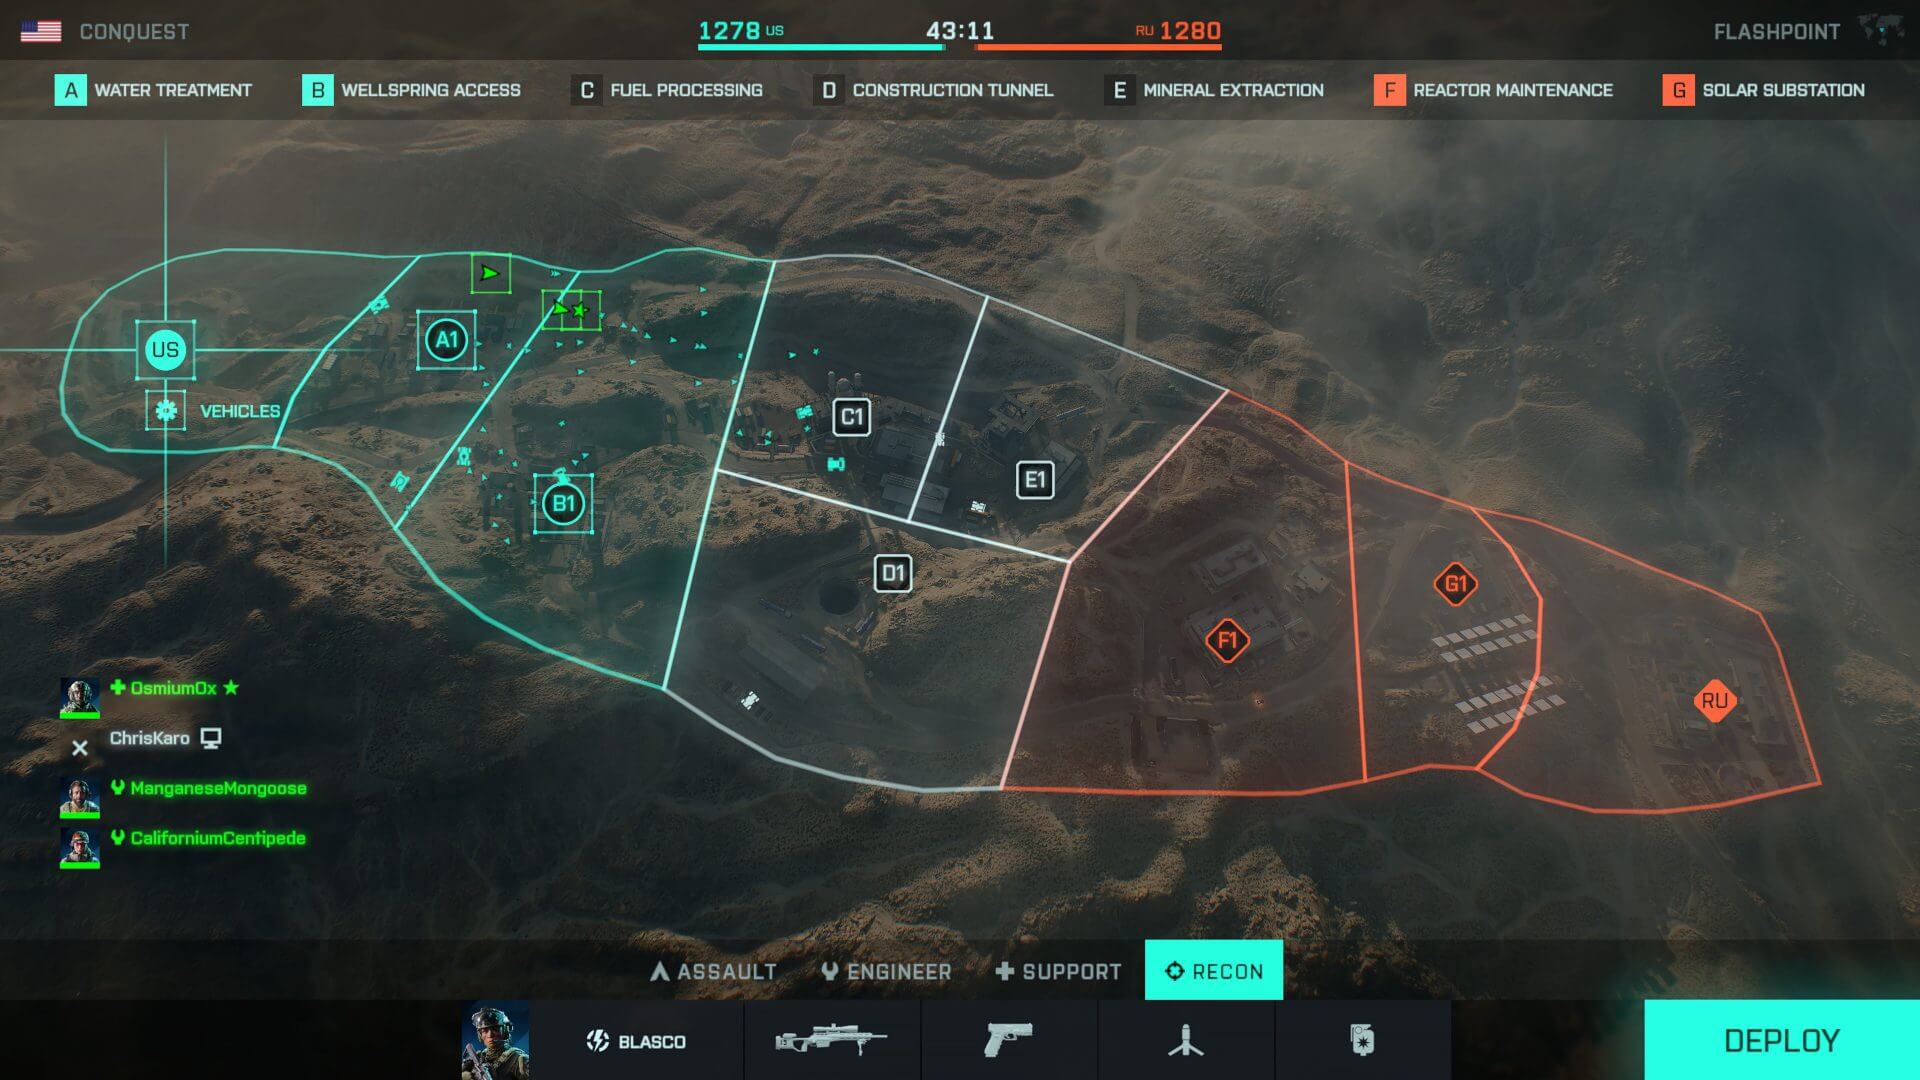 The map for the new Flashpoint map, which takes place on a South African battlefield